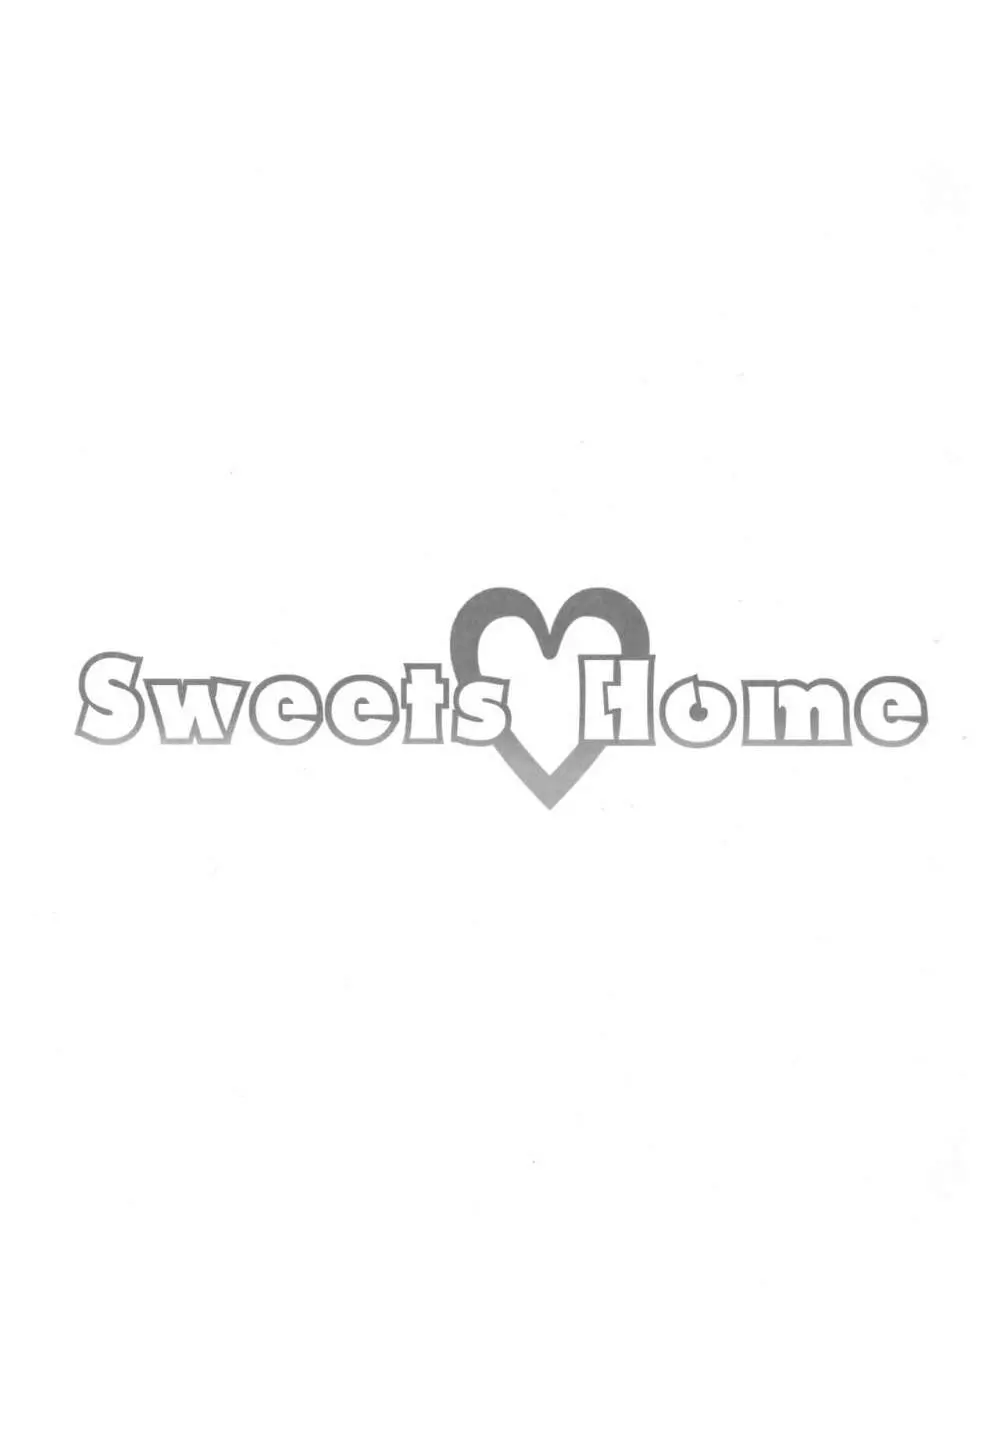 Sweets Home - page3